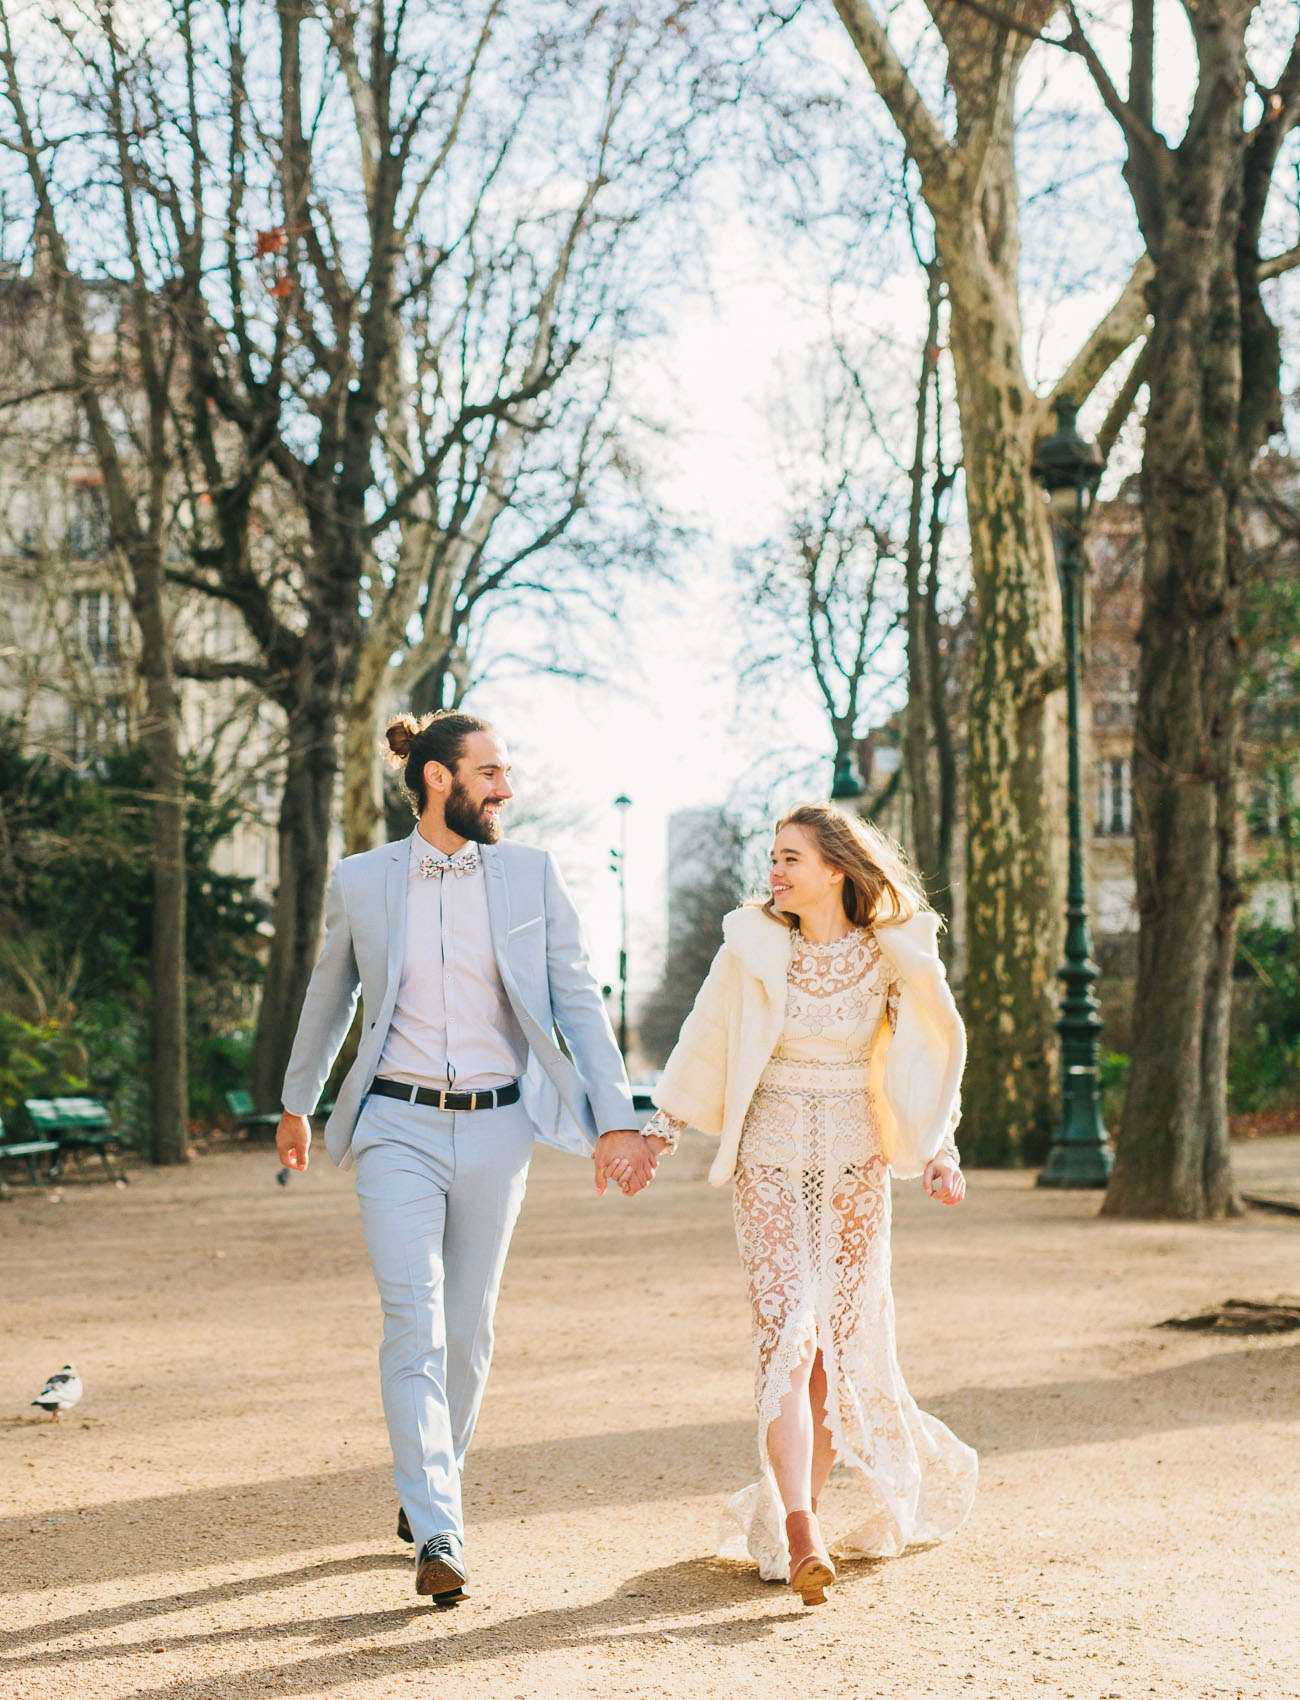 Paris Elopement with a Piano